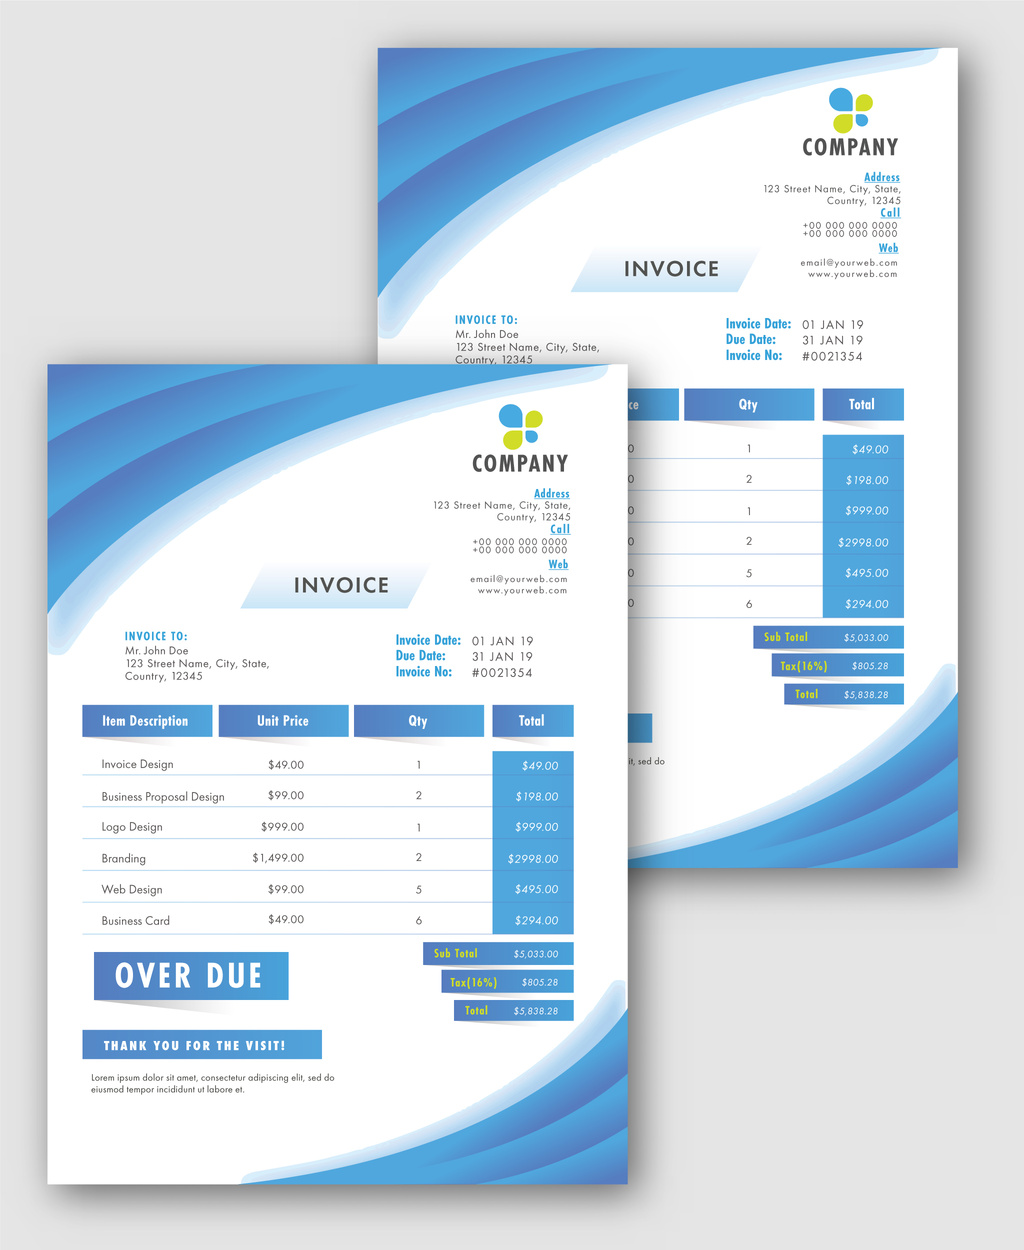 Blue and White Color Invoice Layout Design (AI Format)